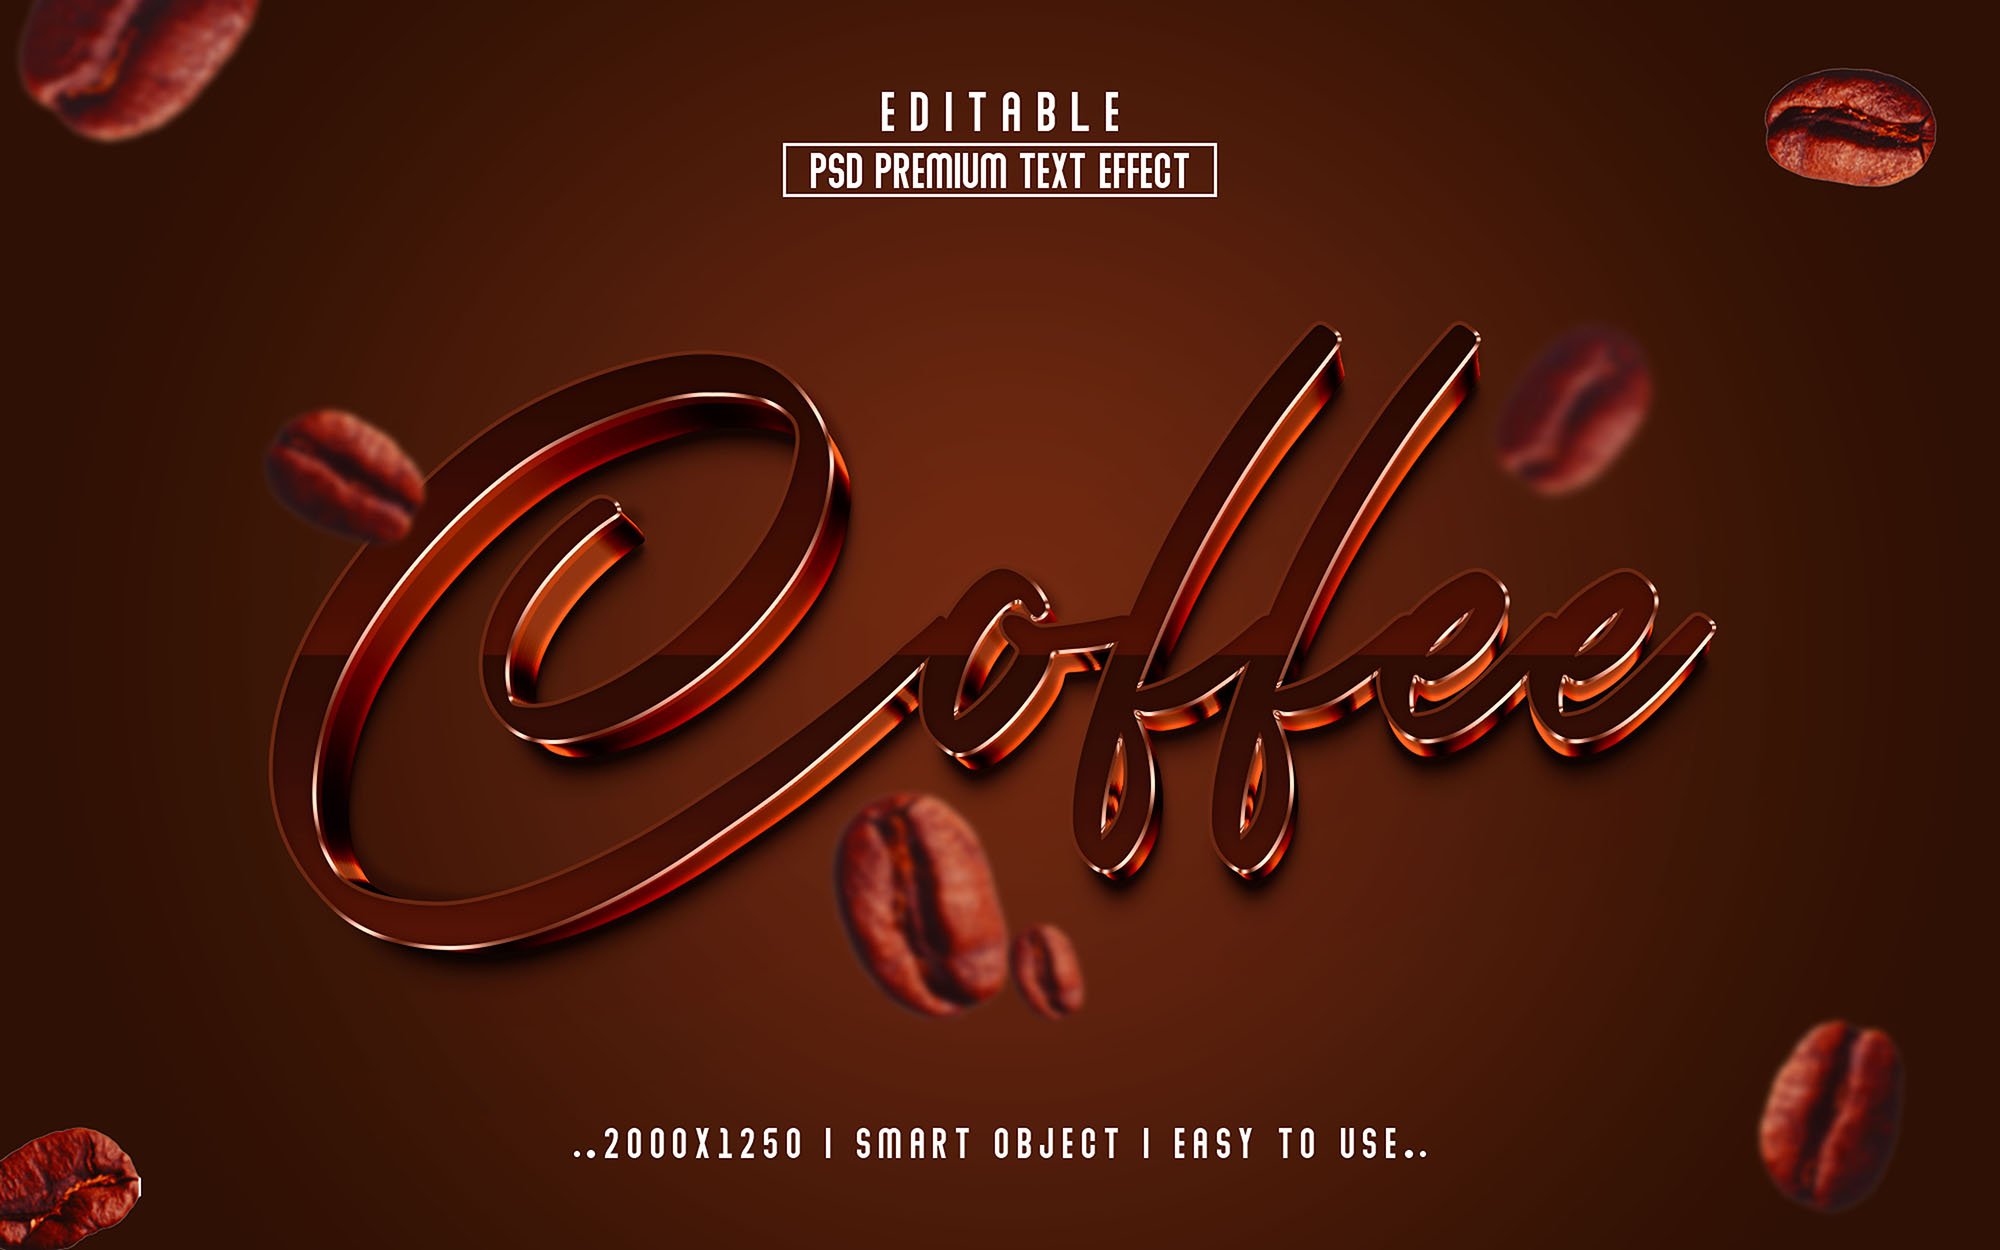 Coffee 3D Editable Text Effect stylecover image.